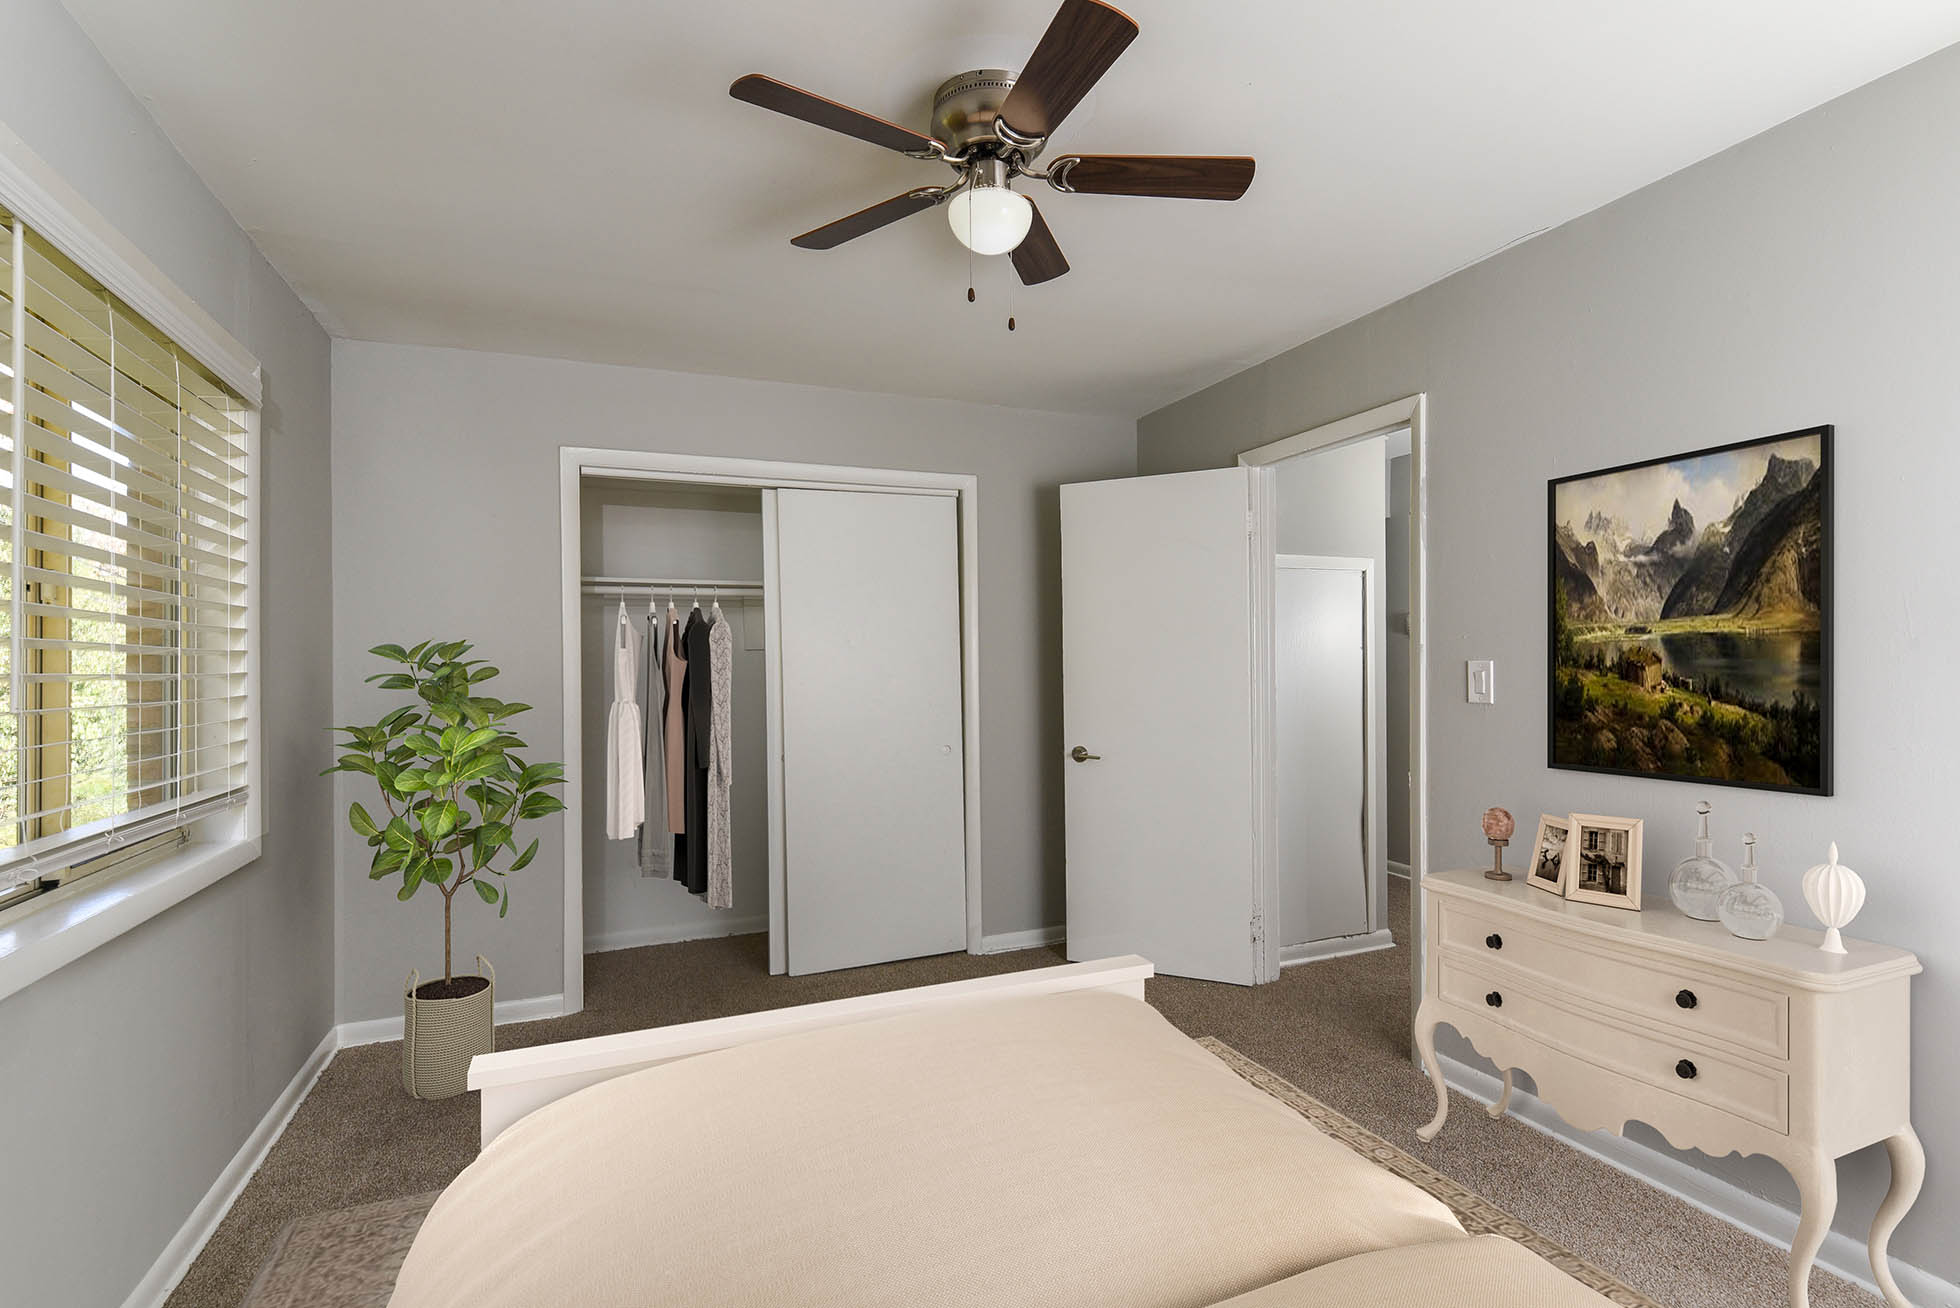 Bedroom with ceiling fan at Harborstone in Newport News, Virginia